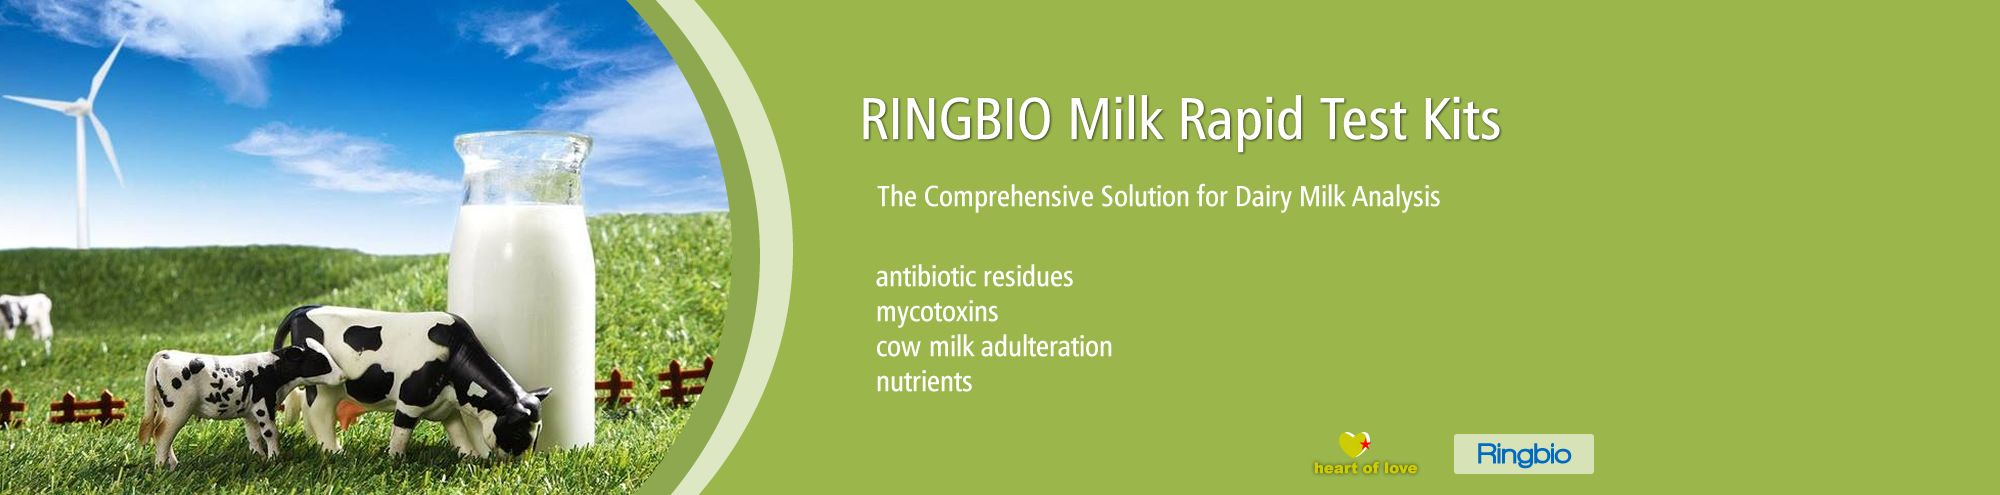 Comprehensive Dairy Milk Rapid Test Solutions from RINGBIO